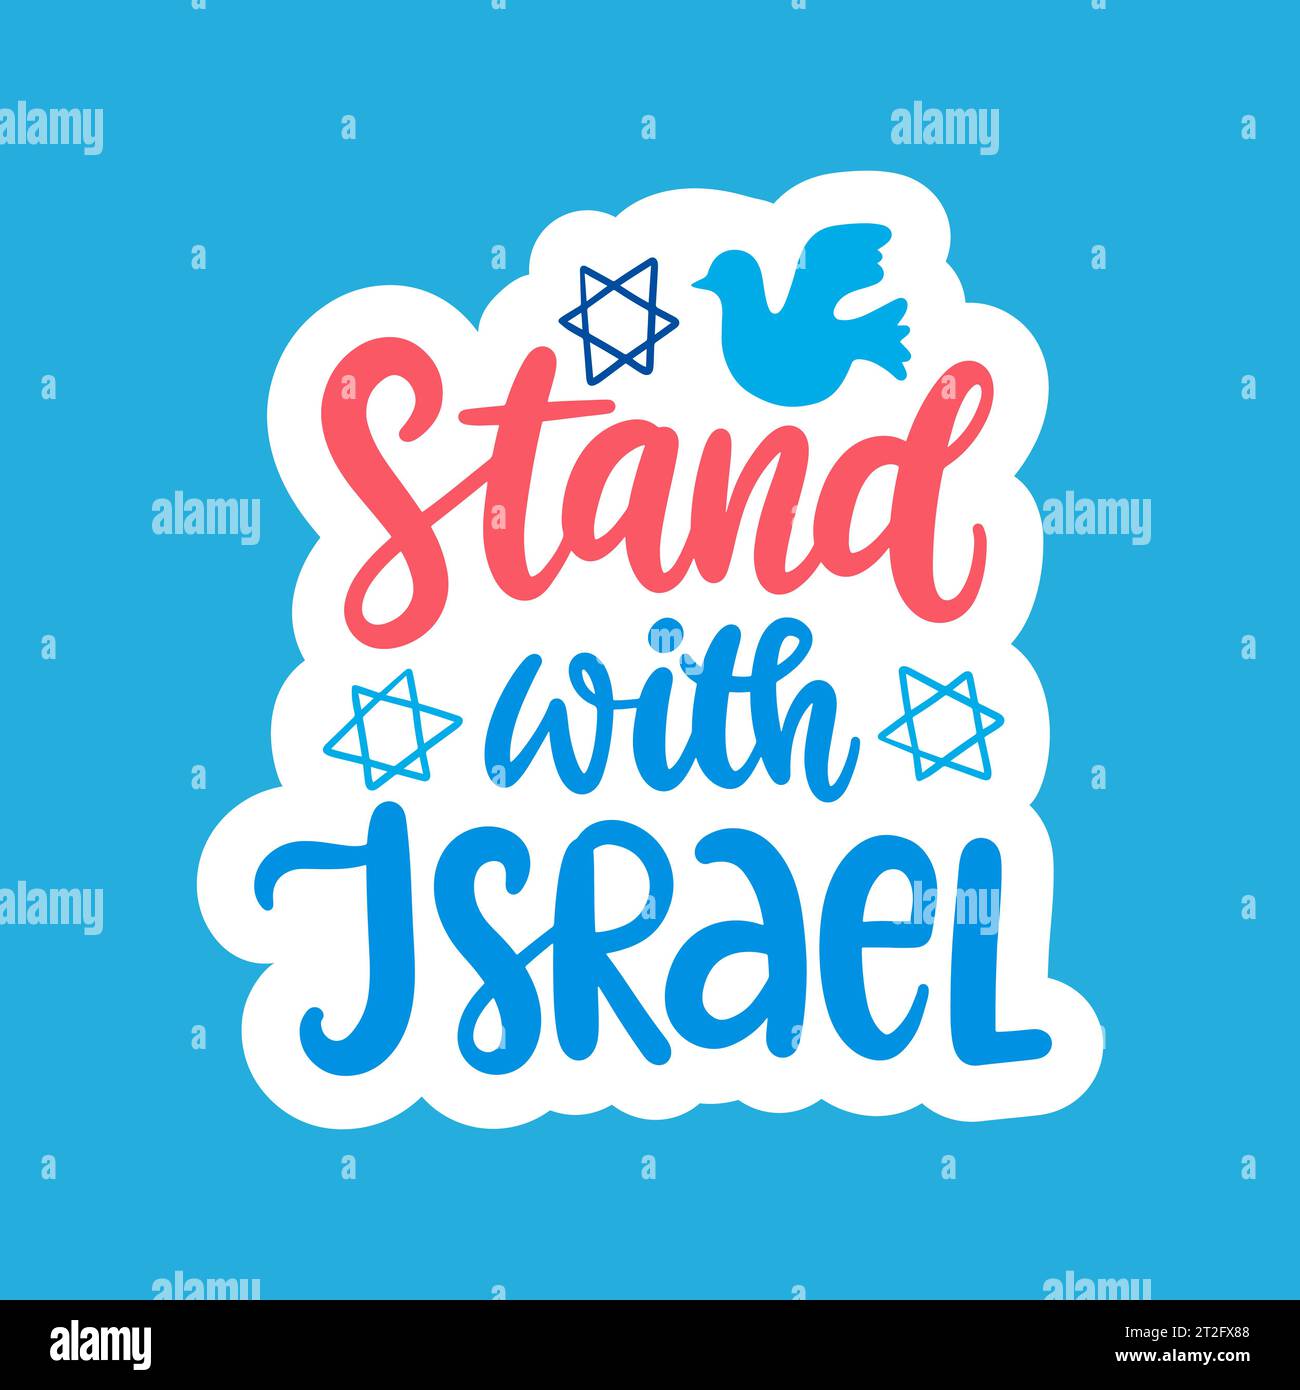 Stand with Israel Inscription Lettering slogan Stock Vector